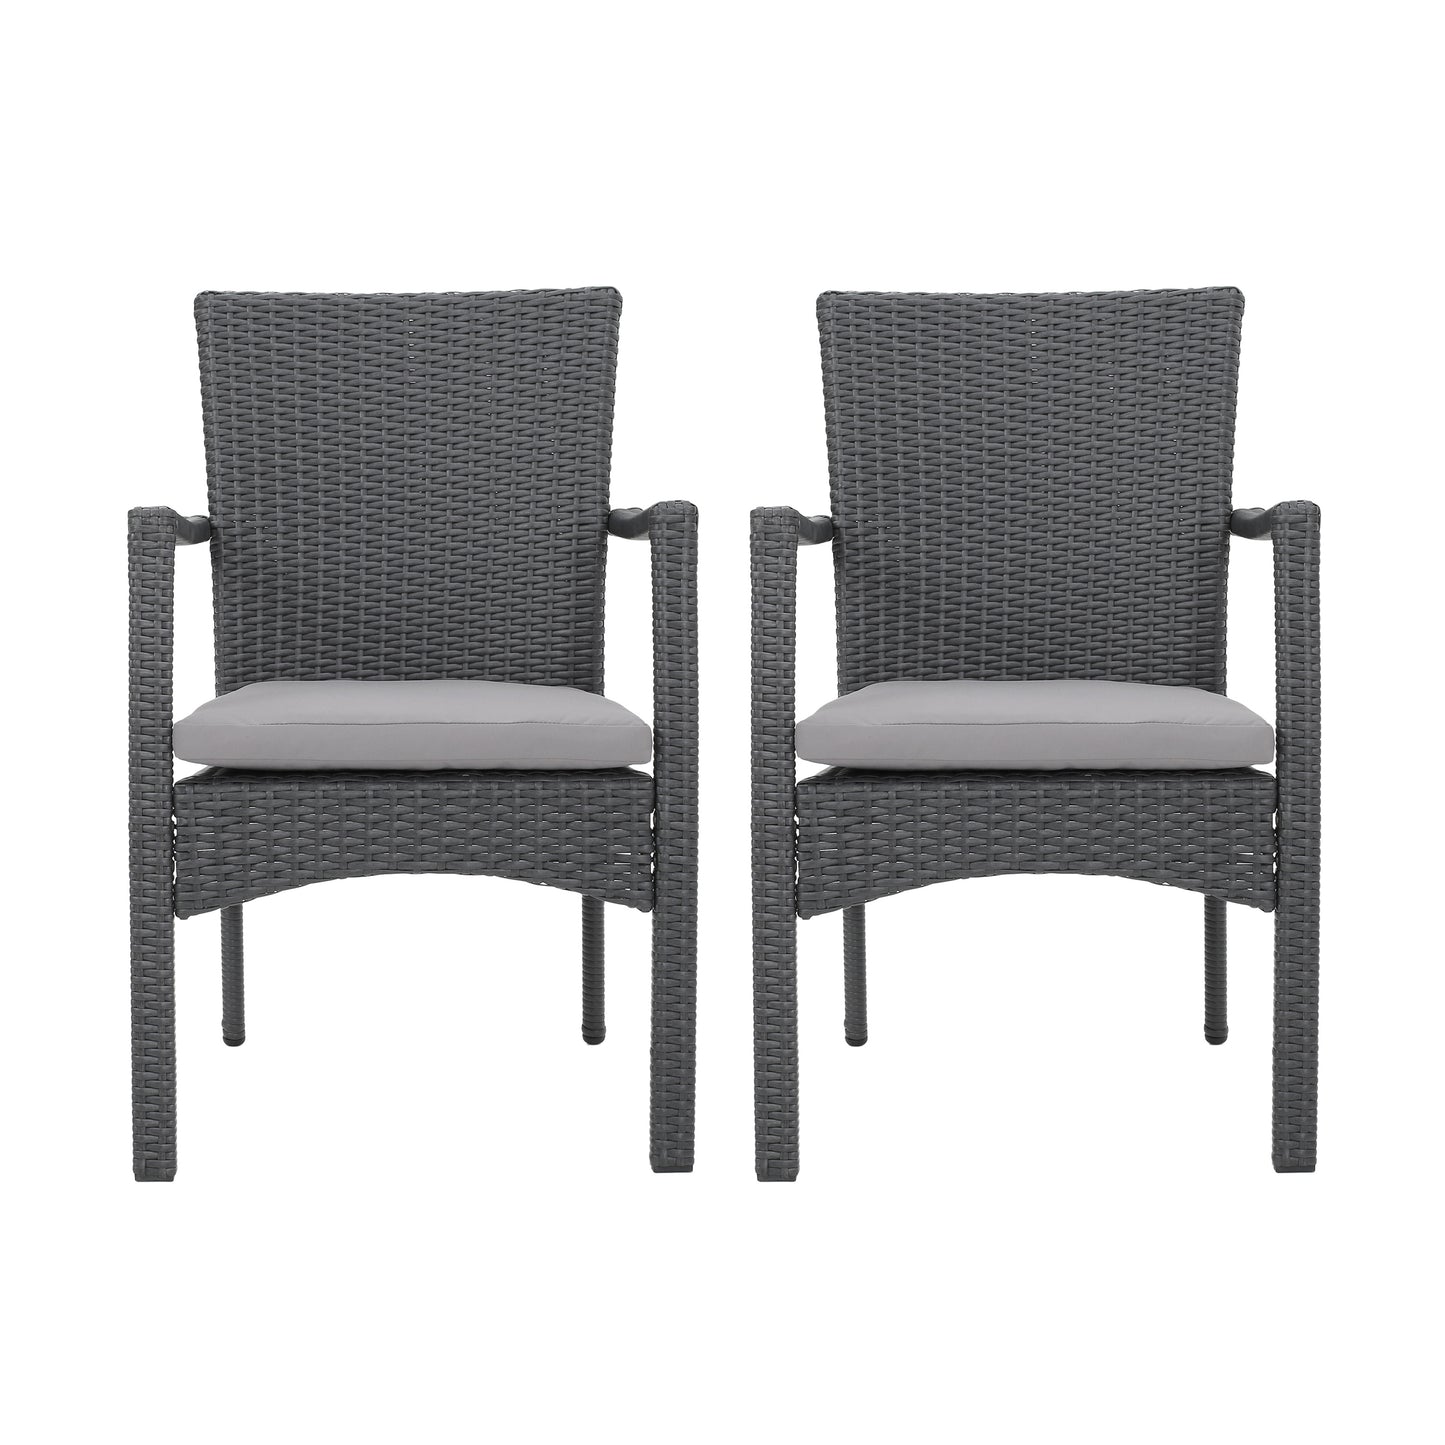 Tigua Outdoor Grey Wicker Dining Chair with Cushions (Set of 2)